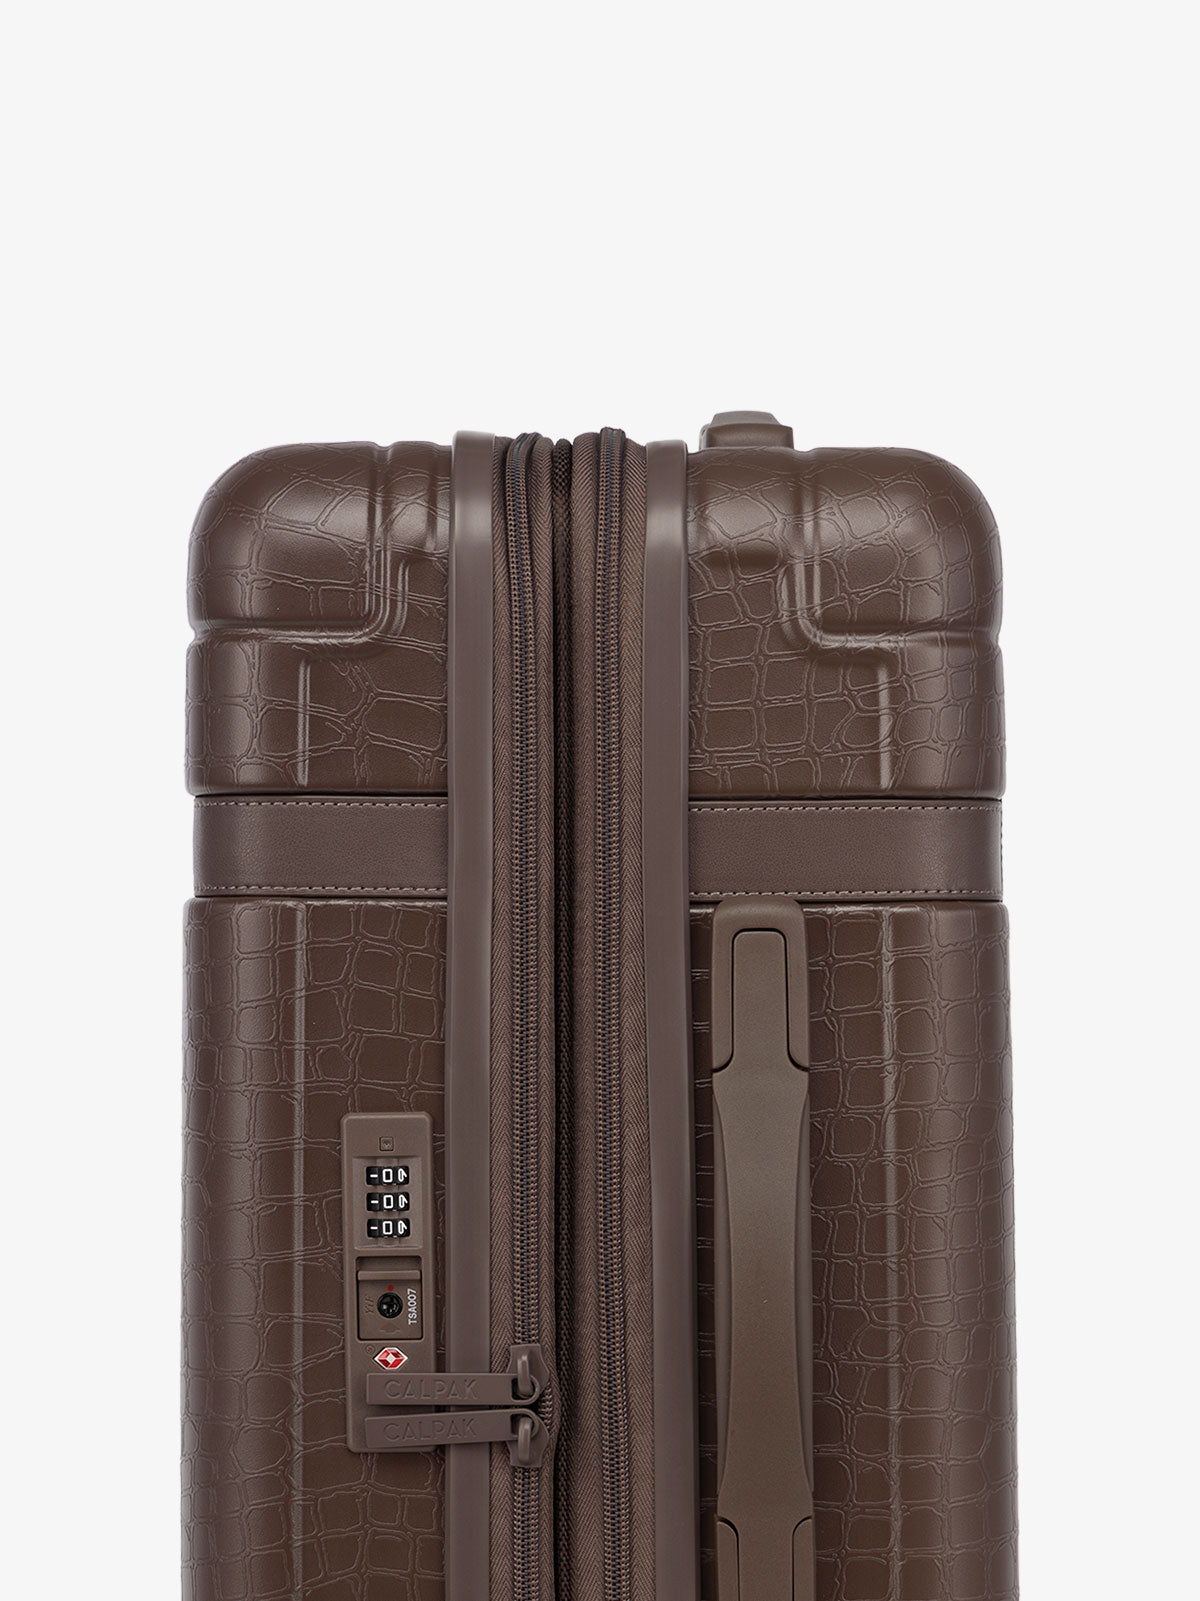 CALPAK TRNK luggage with hard-shell exterior, tsa lock and top and side handles in espresso